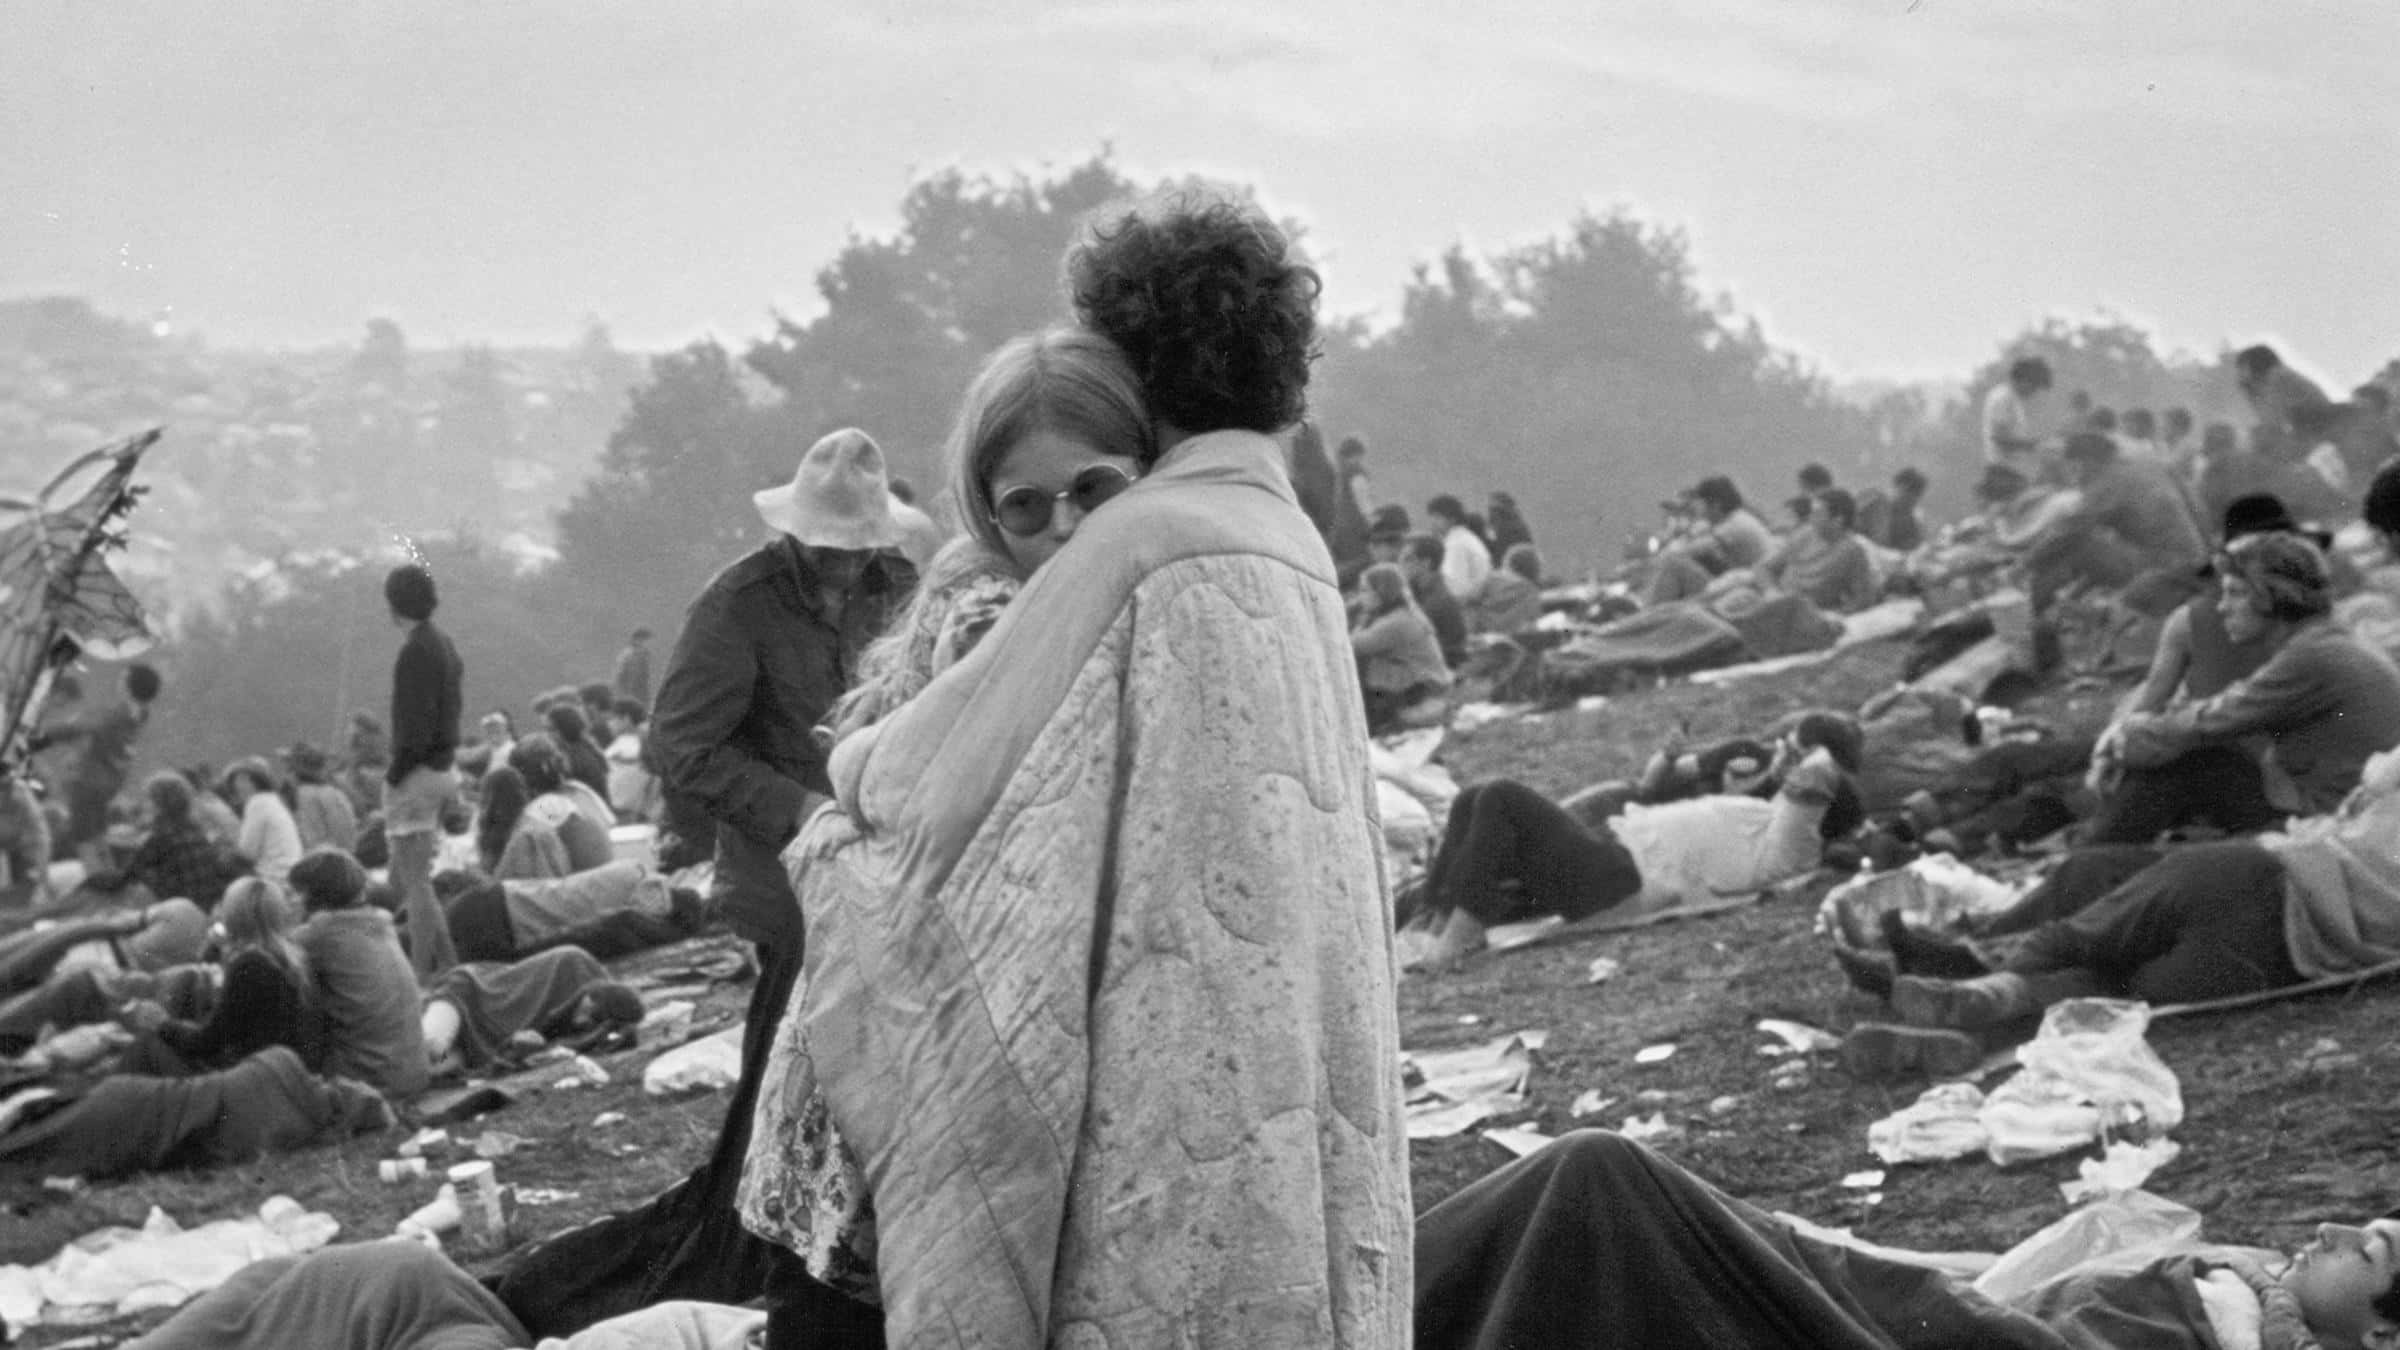 Bopping to the Beats at Woodstock